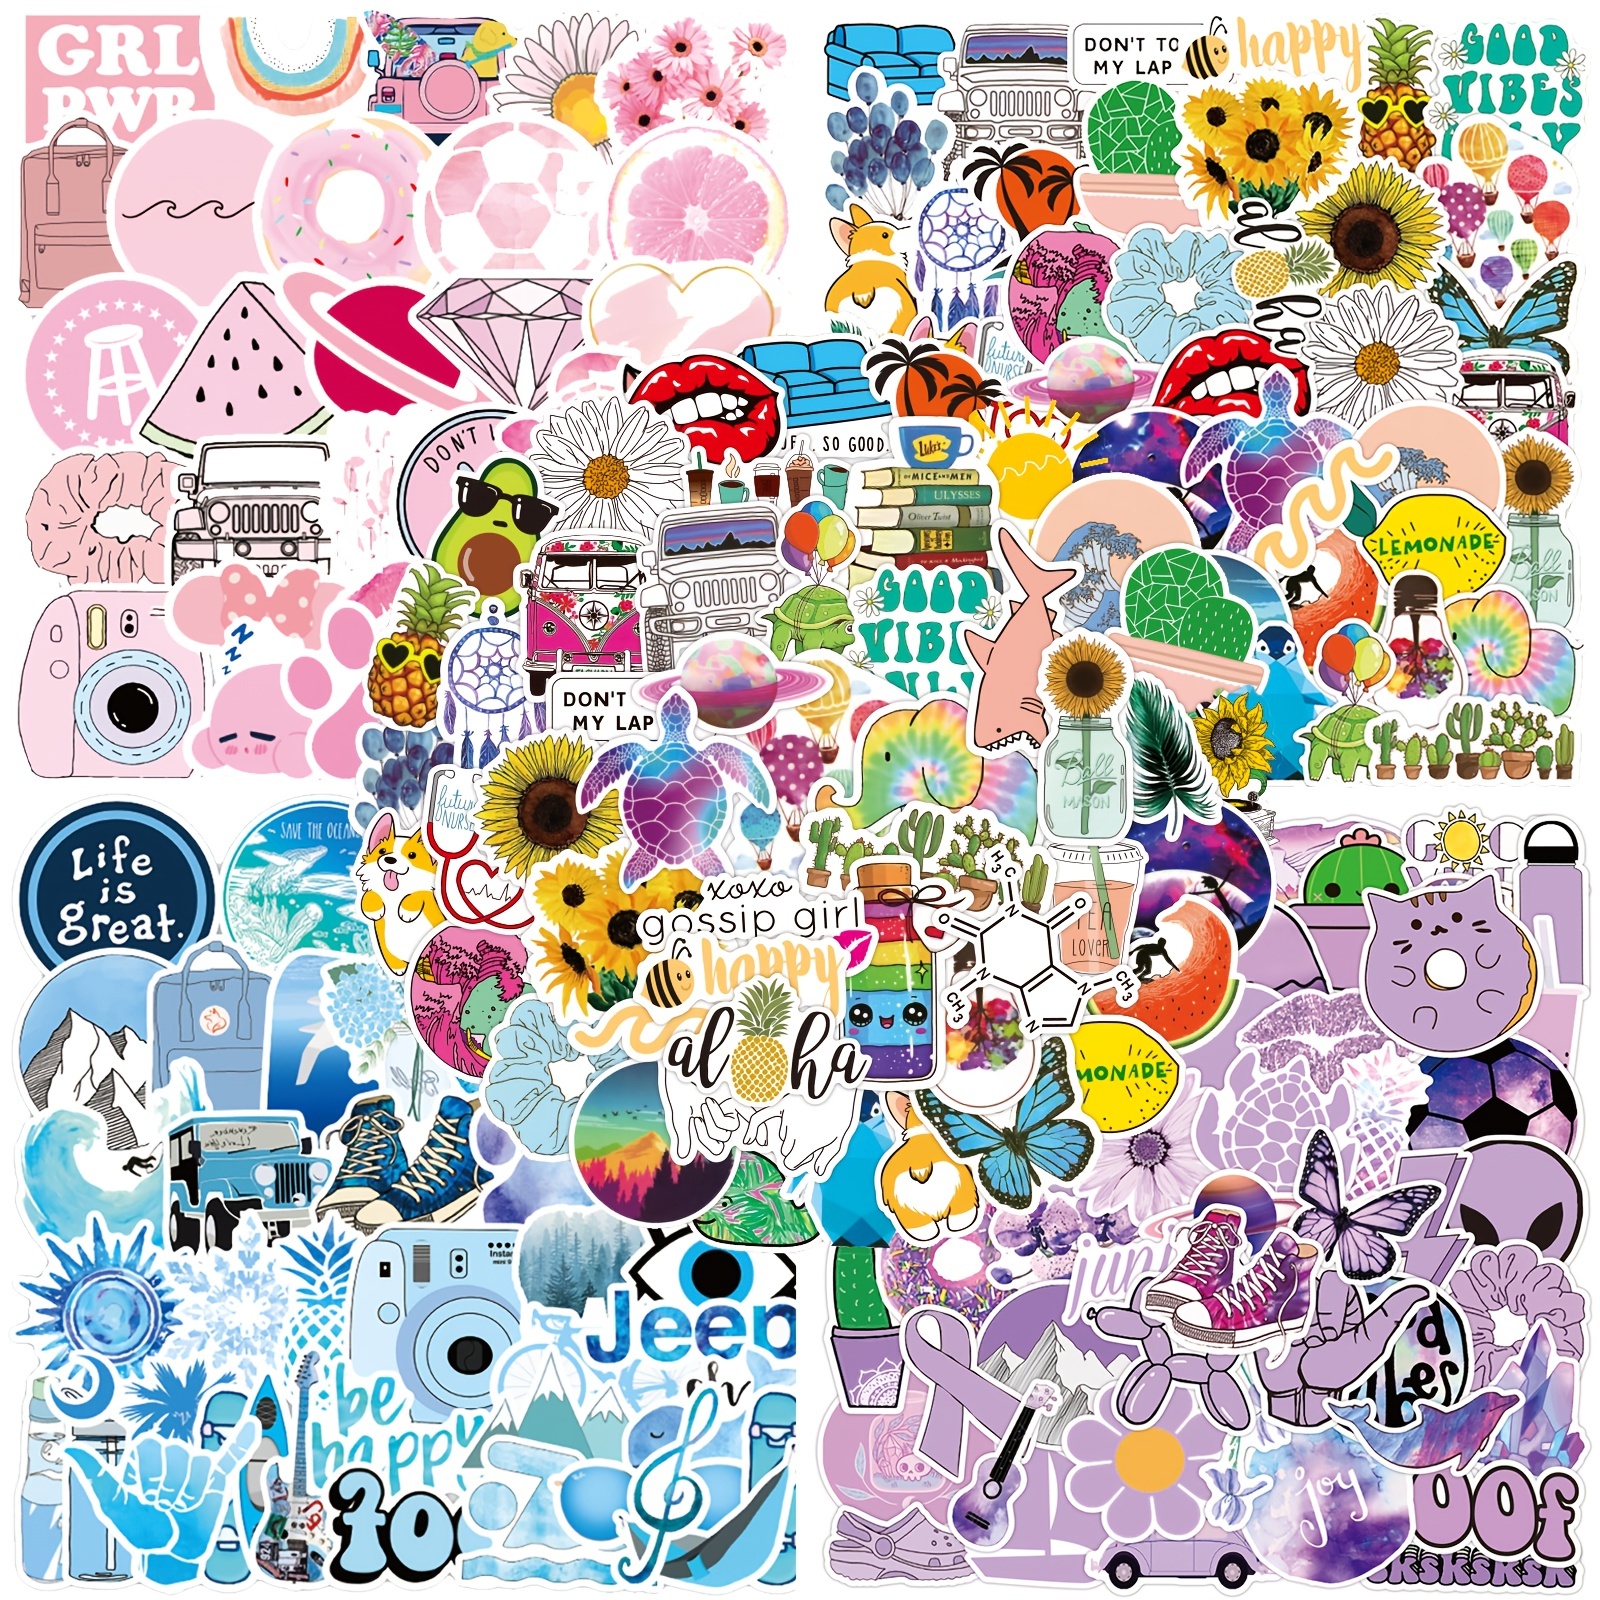 50 Inspirational Waterproof Stickers For Laptops And Water Bottles Funny  Gift Wrap From Douglass, $9.18